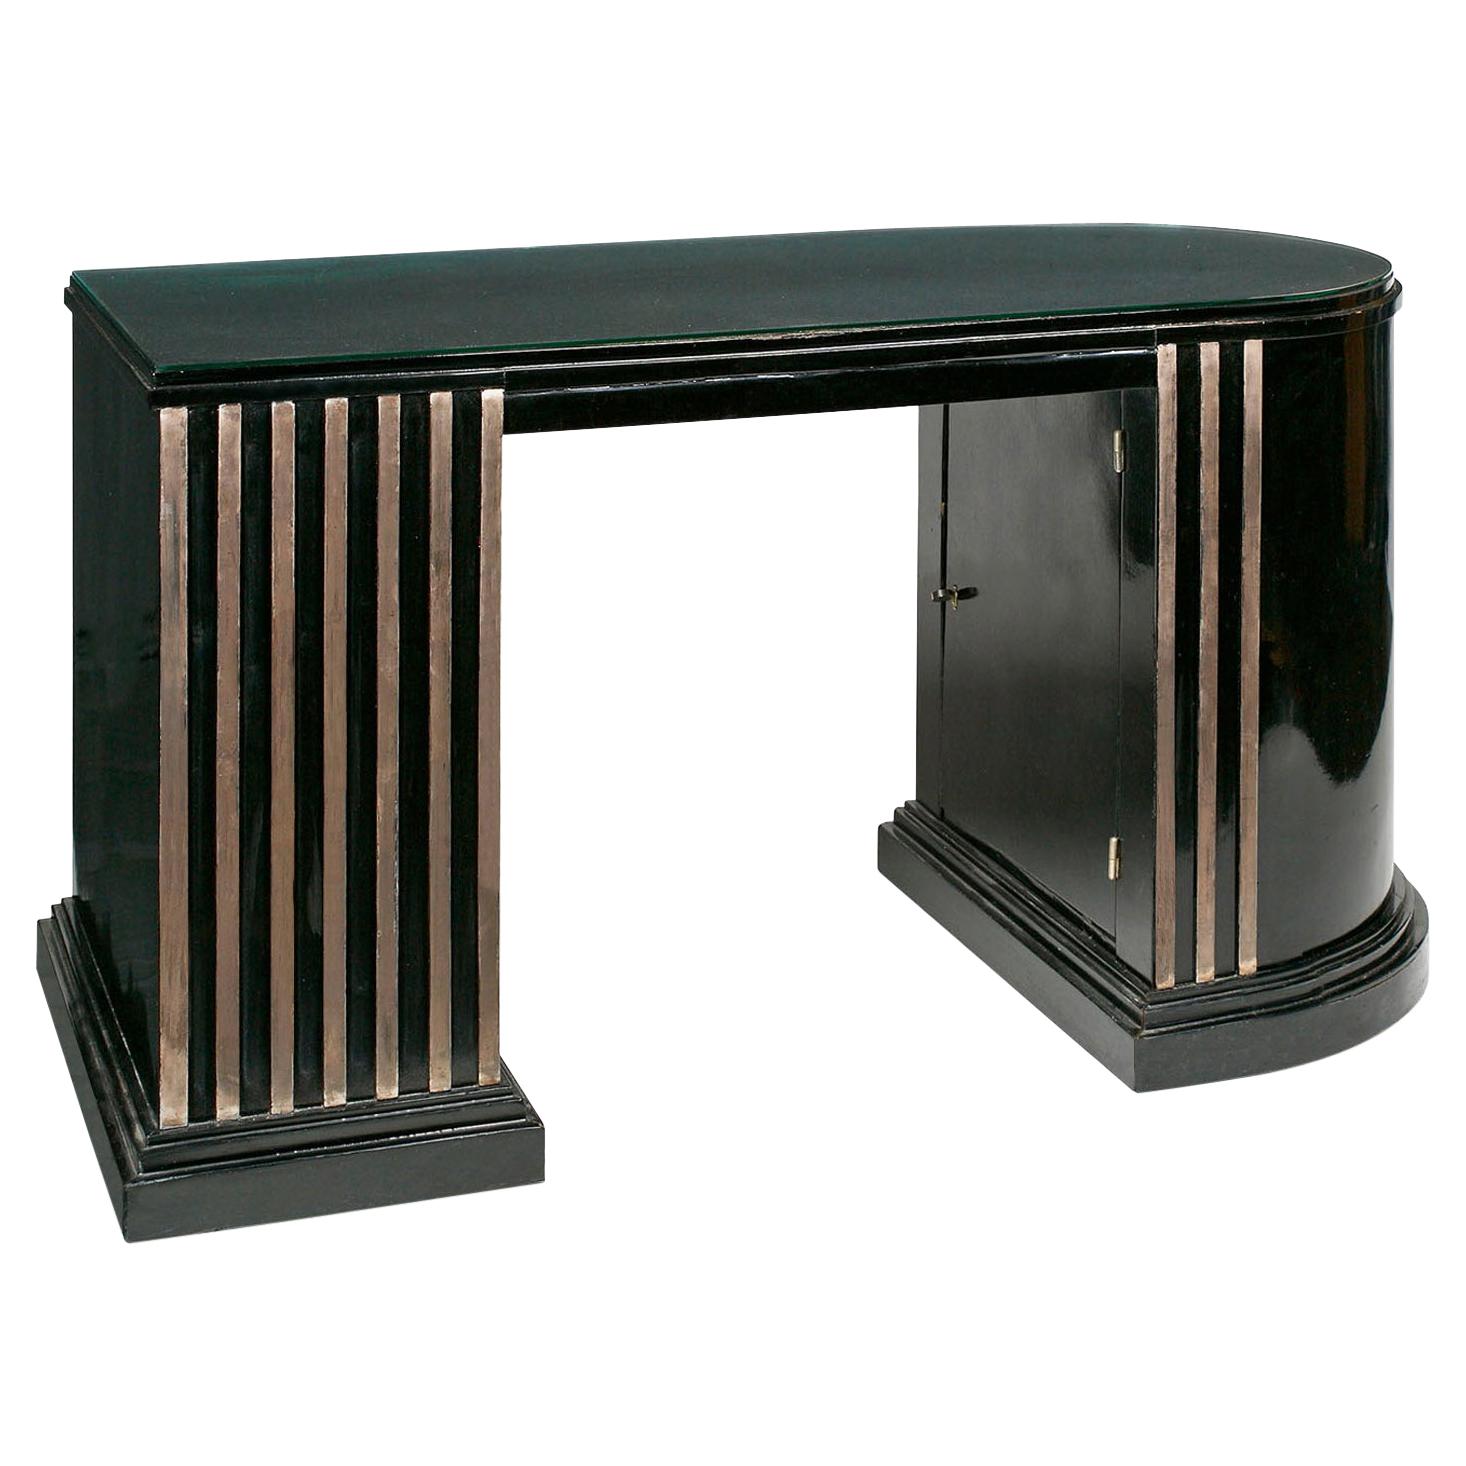 French Art Deco Black Lacquer Desk with White-Gold Leaf Details For Sale